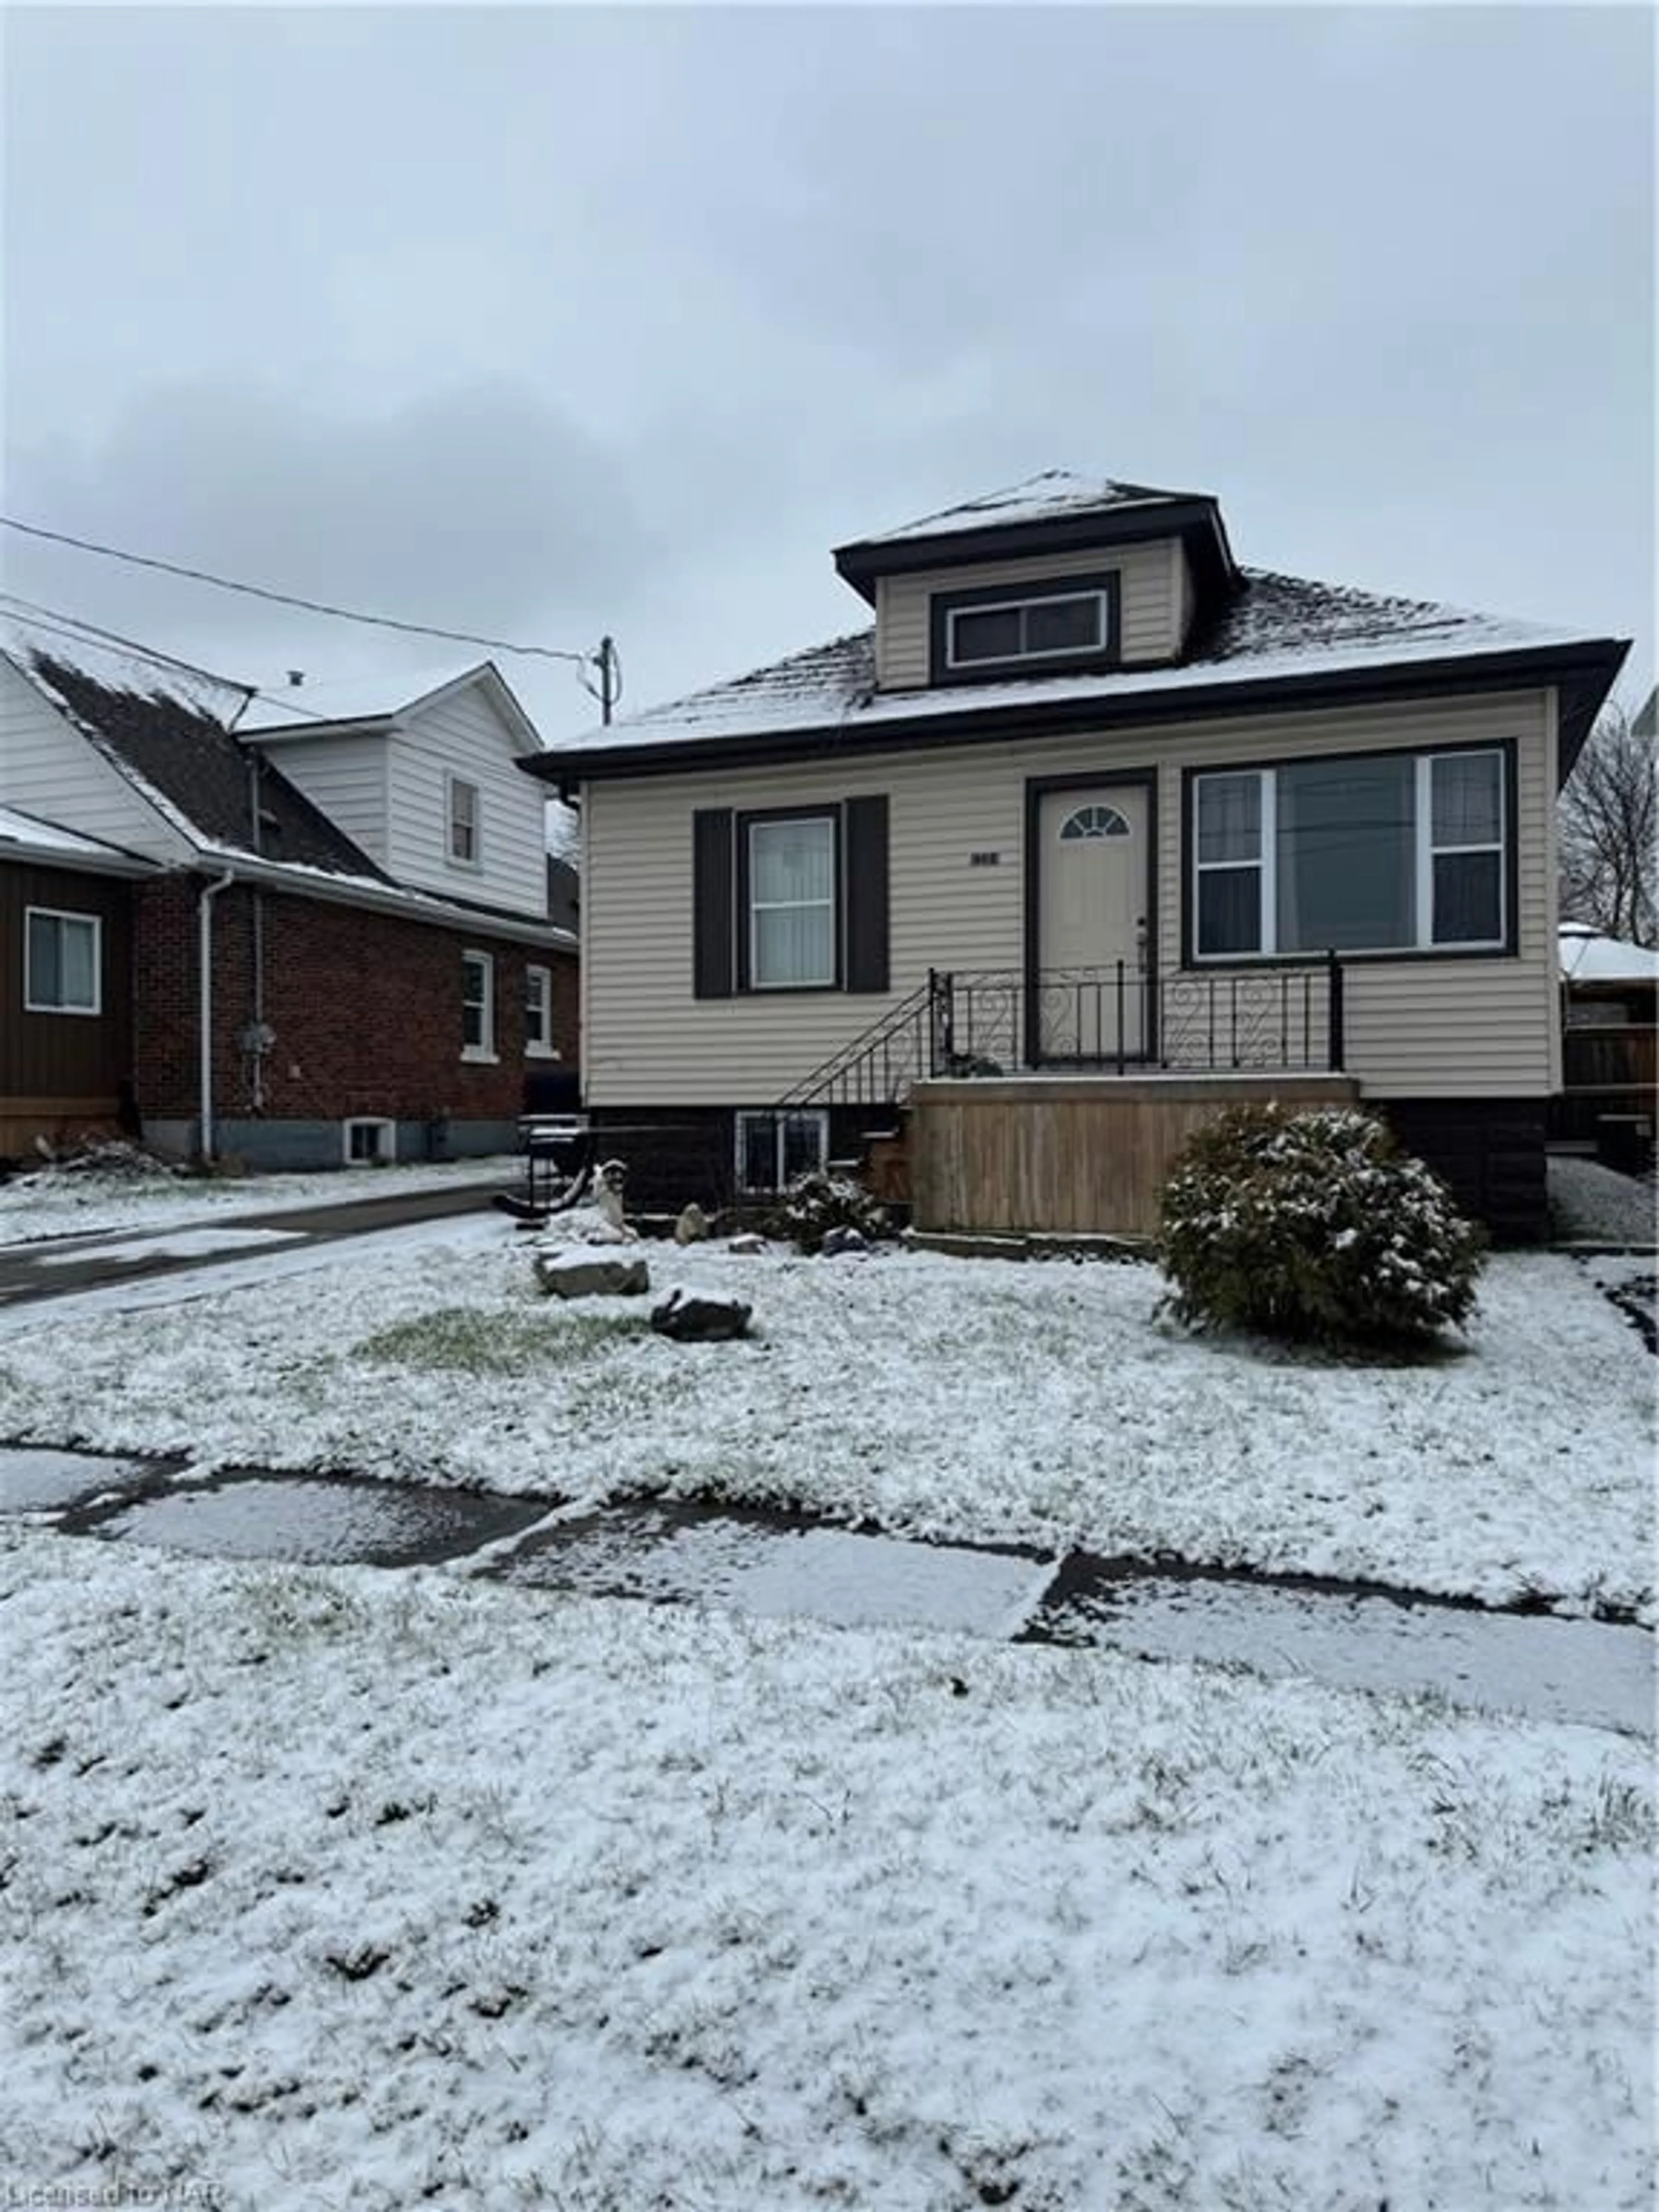 Frontside or backside of a home for 5564 Fraser St, Niagara Falls Ontario L2E 3C9